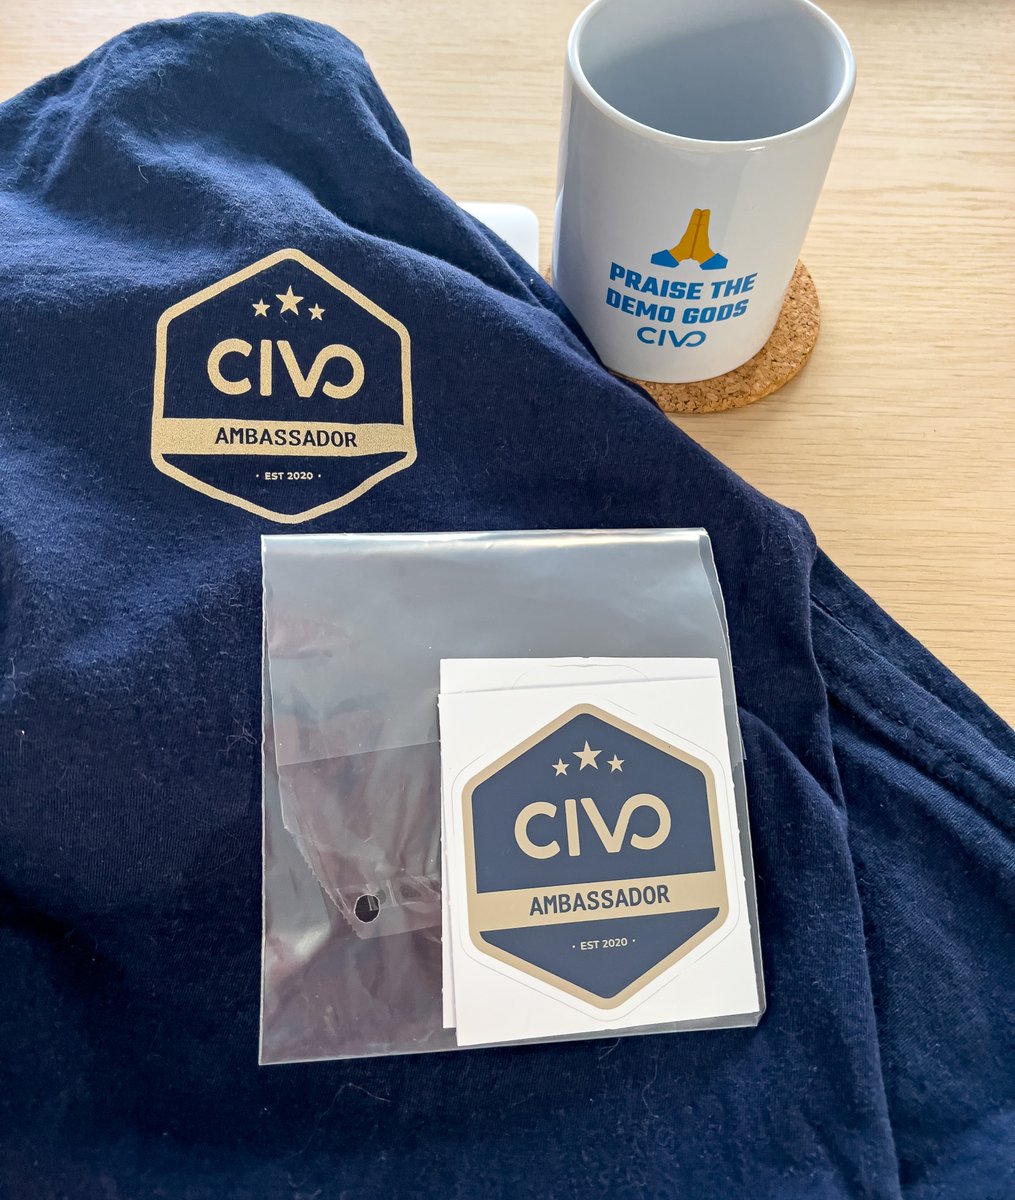 Thanks @CivoCloud for the swag! YouTube video coming out next week on Civo Compute (VM) and planning a video on your managed Databases